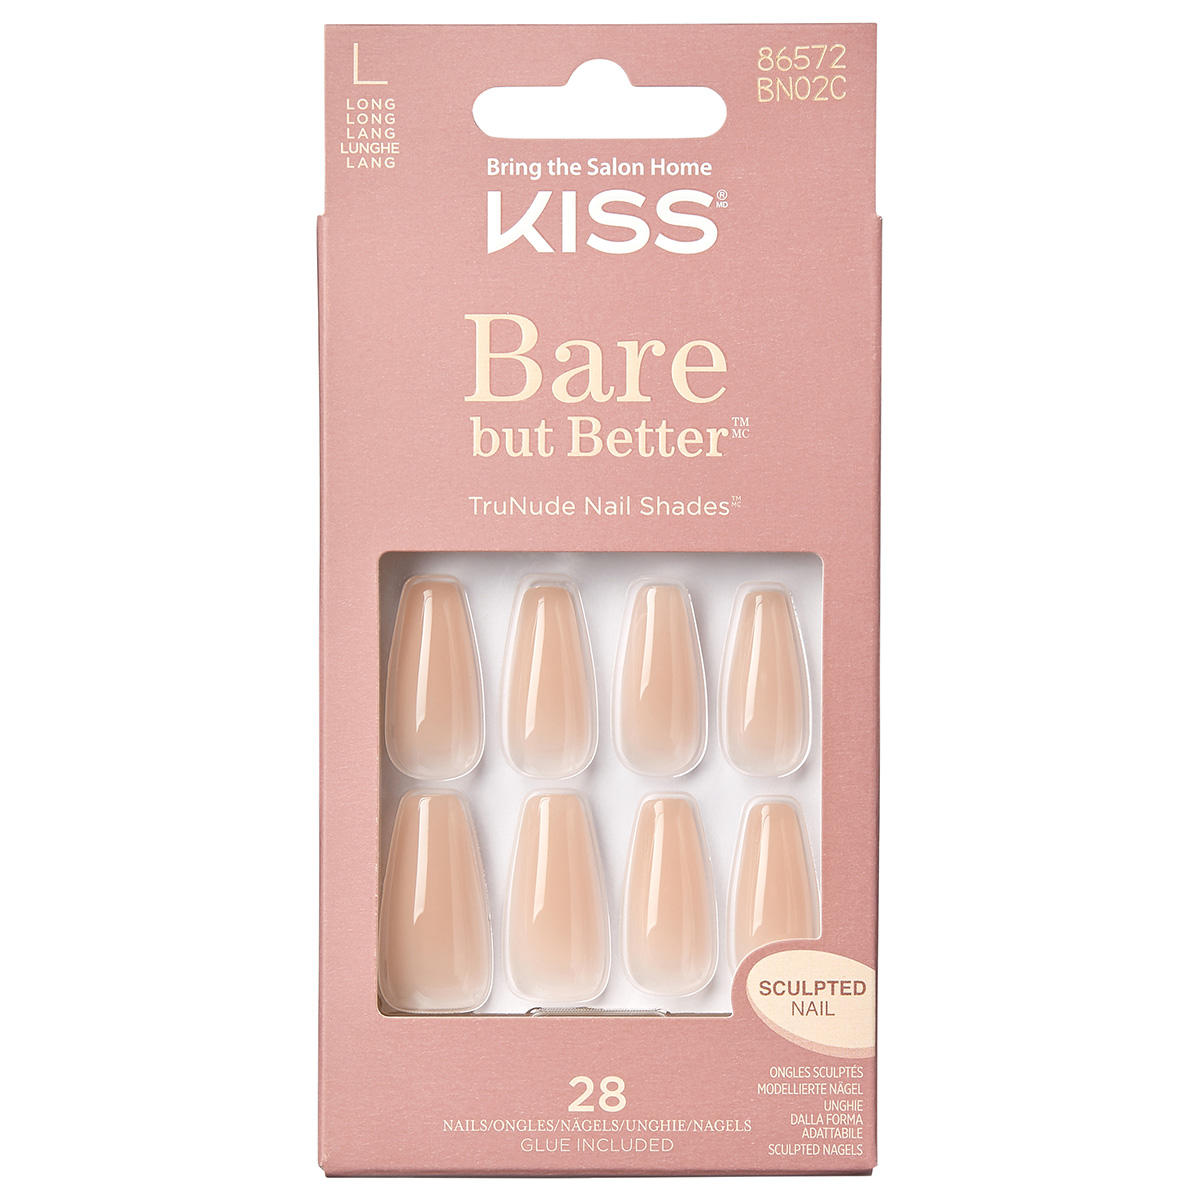 kiss bare but better nails - nude drama